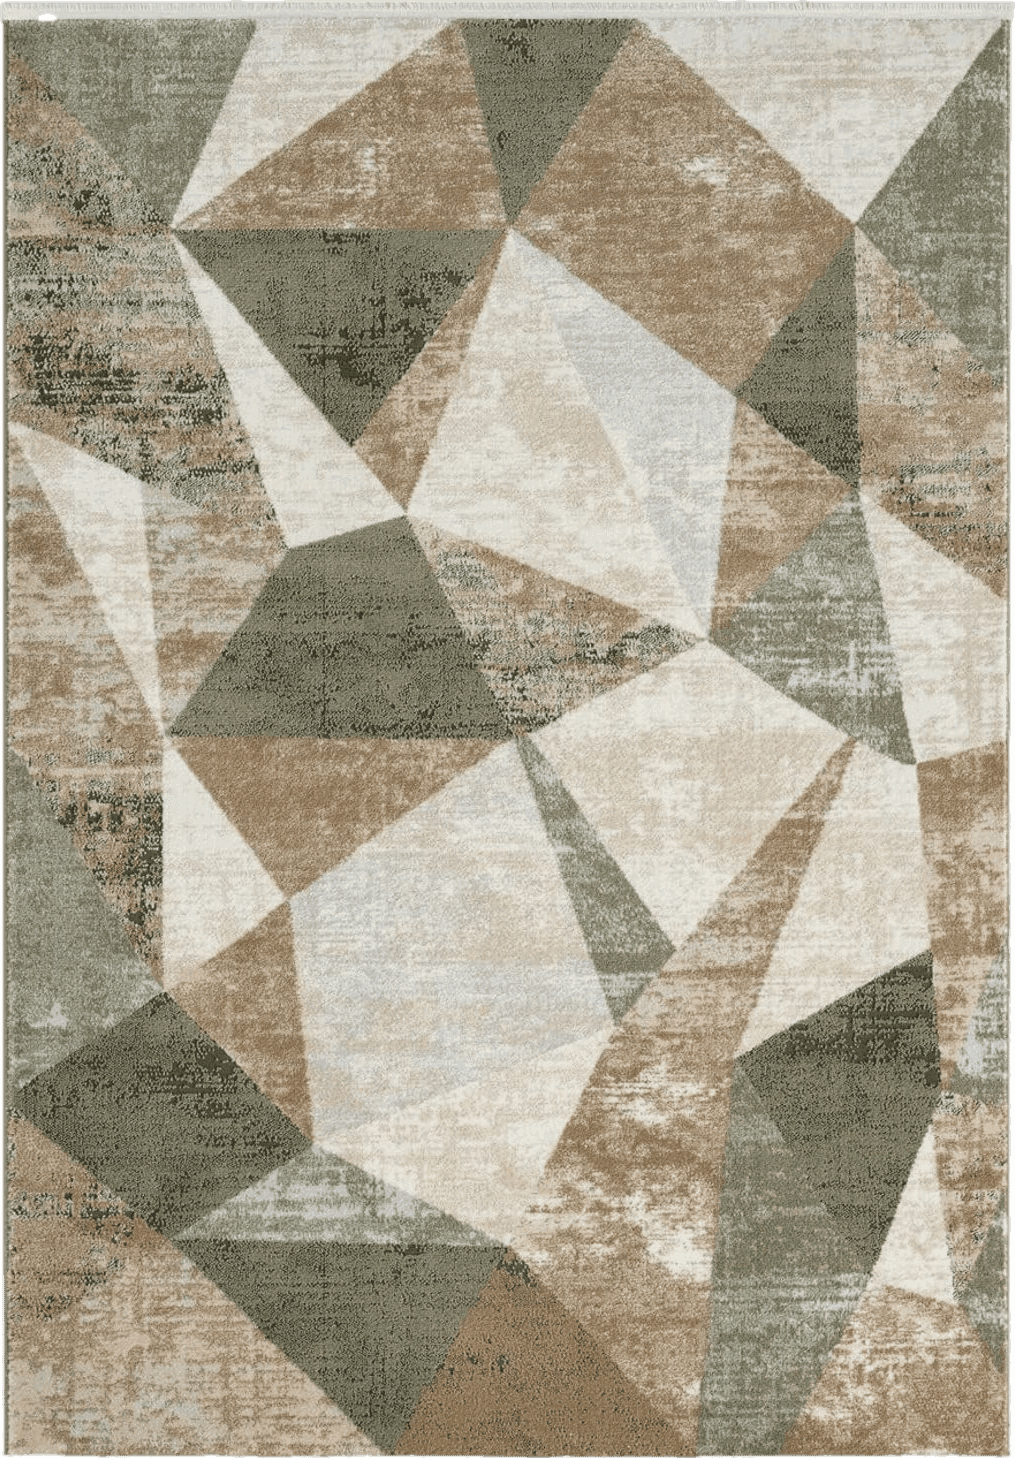 Abani Savoy Collection Area Rug - Green and Cream Geometric Design - 4'x6' - Easy to Clean - Durable for Kids and Pets - Non-Shedding - Medium Pile - Soft Feel - for Living Room, Bedroom, and Office